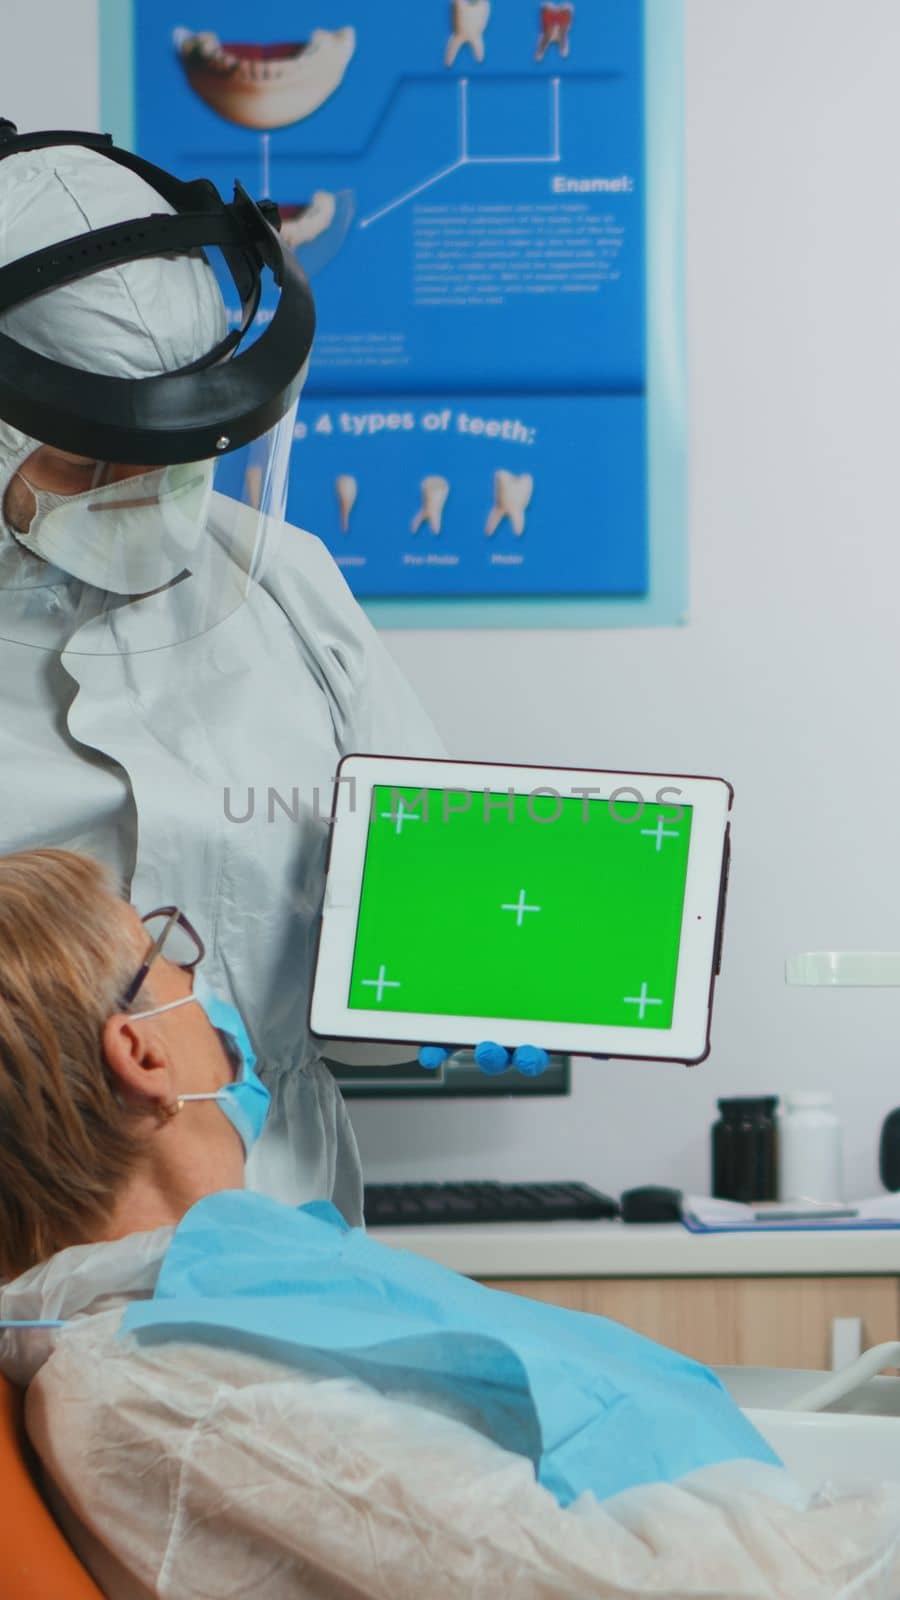 Dentist with face shield pointing at green screen display by DCStudio